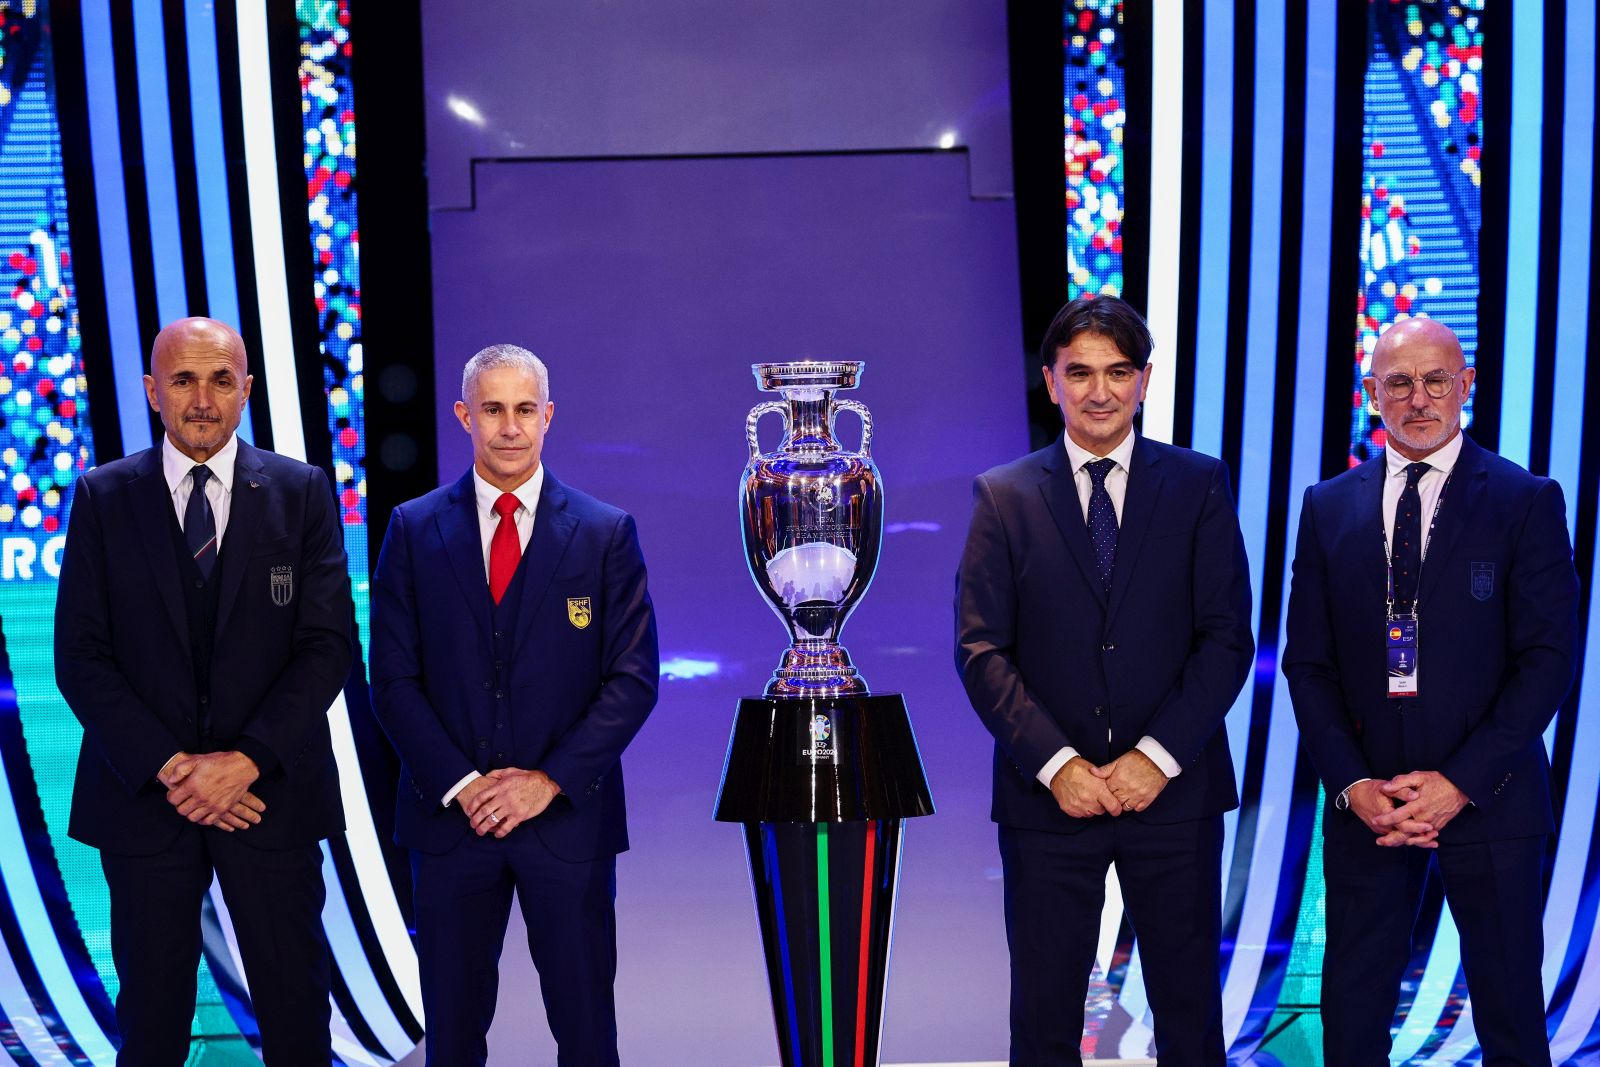 epa11007967 (L-R) Italy's head coach Luciano Spalletti, Albania's head coach Sylvinho, Croatia's head coach Zlatko Dalic and Spain's head coach Luis de la Fuente of Group B pose next to the trophy during the UEFA EURO 2024 final tournament draw at the Elbphilharmonie in Hamburg, Germany, 02 December 2023. The UEFA EURO 2024 will take place in Germany from 14 June to 14 July.  EPA/FILIP SINGER